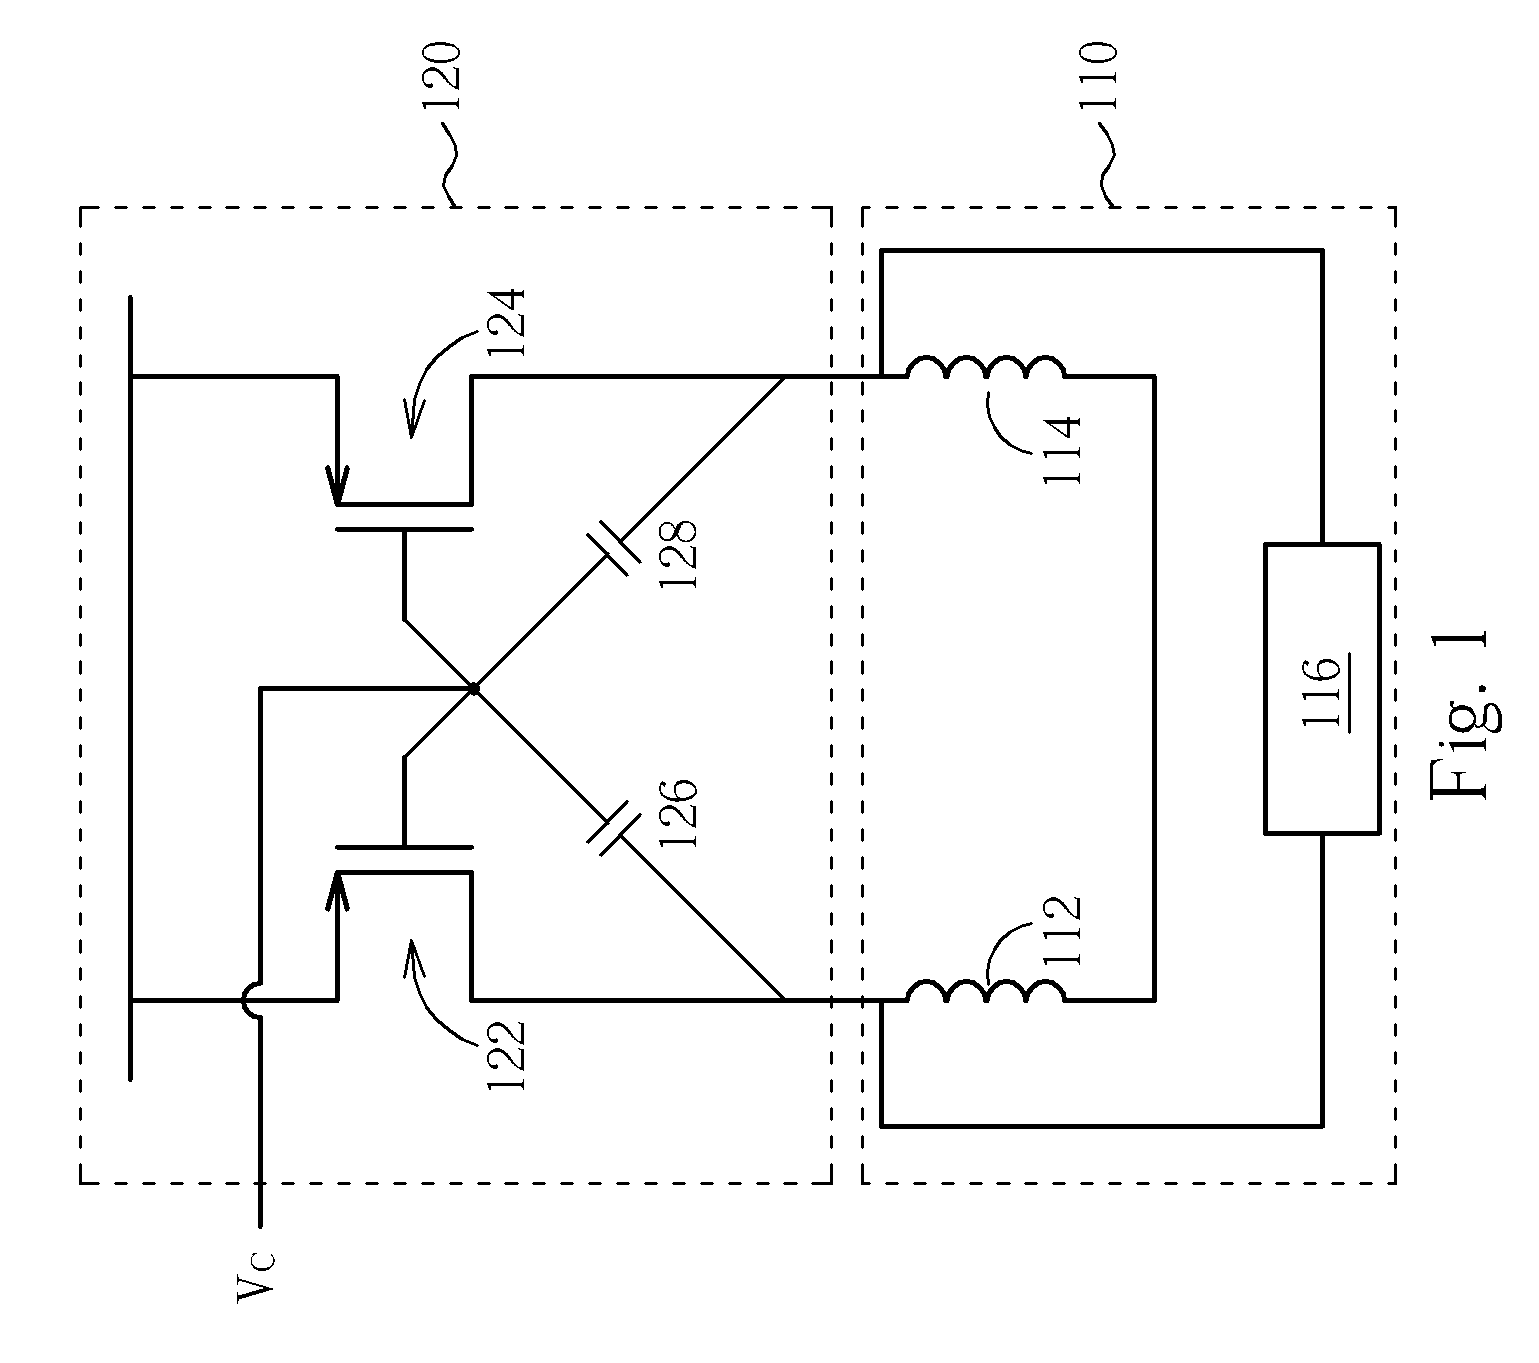 Inductor Q factor enhancement apparatus has bias circuit that is coupled to negative resistance generator for providing bias signal